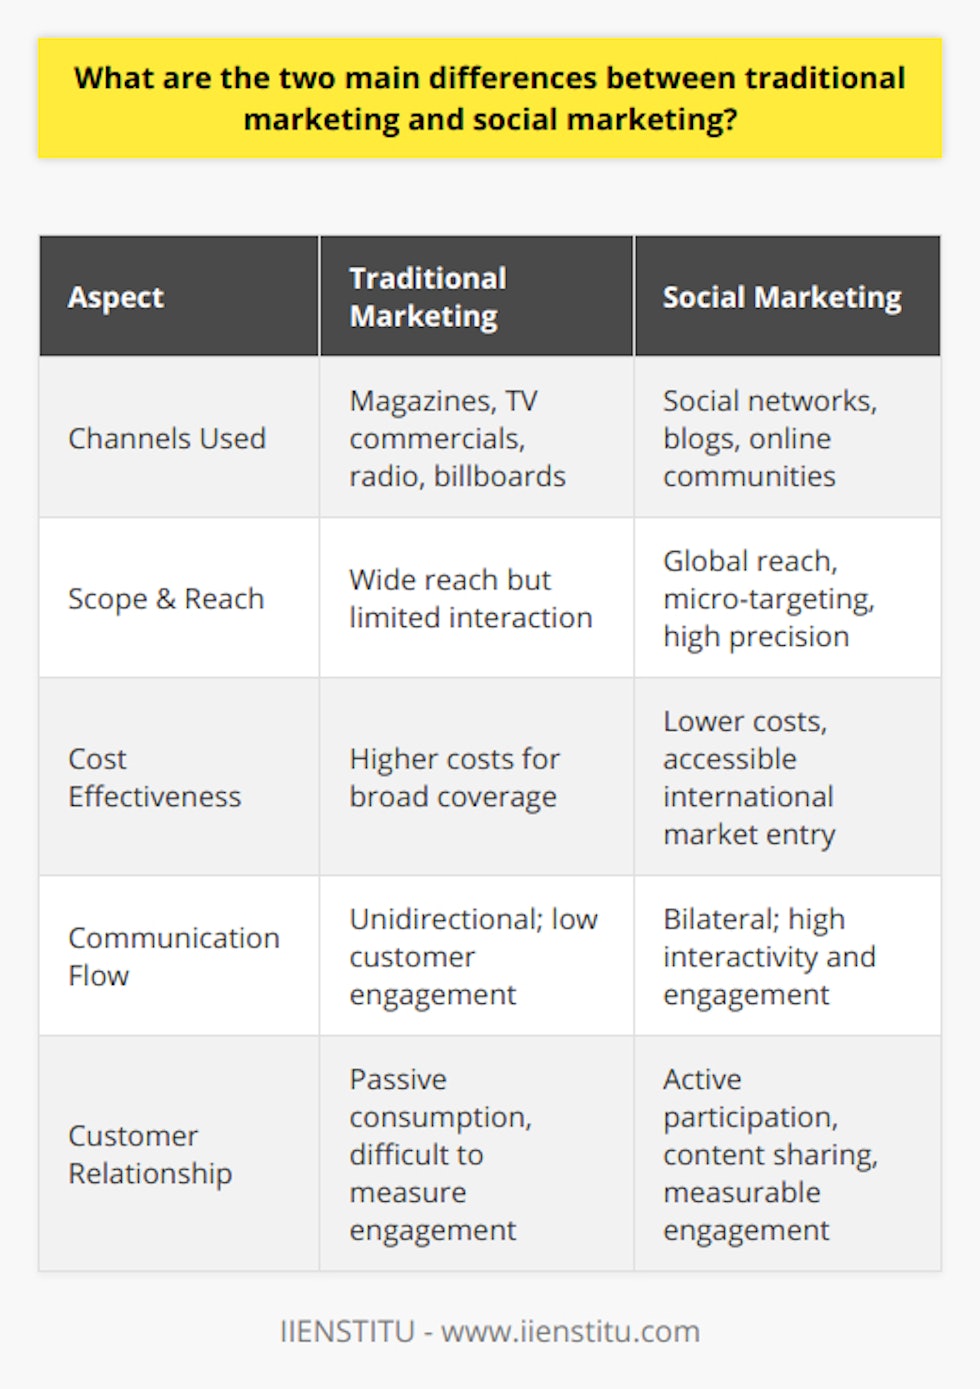 Traditional marketing and social marketing have undergone significant evolution, particularly with the advent of digital technology. This evolution has led to fundamental differences in how companies approach their marketing strategies.One of the primary differences is seen in the scope and reach of marketing channels. Traditional marketing focuses on reaching consumers through conventional mediums such as magazines, television commercials, radio broadcasts, and billboards. These channels often have a wide reach but provide limited interaction with the audience. In contrast, social marketing exploits the widespread adoption of the internet and leverages digital platforms like social networks, blogs, and online communities. Unlike traditional media, these digital channels enable businesses to micro-target specific demographics, interests, and behaviors, not just reach a general audience. As such, the precision in targeting is vastly superior in social marketing compared to traditional marketing methods.Moreover, social marketing channels offer an unprecedented global reach. While traditional marketing can still reach across borders, especially through television and magazines, social marketing’s global reach is more accessible and cost-effective, allowing even small businesses to enter international markets with relative ease.The second striking difference is in the role of customer engagement. Traditional marketing is characterized by its unidirectional approach, where communication flows from the company to the audience without a real-time avenue for receiving feedback or fostering dialogue. This passive consumption of marketing messages means that customer engagement is generally low and difficult to measure.On the other hand, social marketing is inherently interactive. Platforms like Facebook, Instagram, Twitter, and LinkedIn facilitate a bilateral communication flow, creating space for dialogue and interaction between brands and consumers. This interactivity leads to higher levels of customer engagement, with consumers actively participating in conversations, sharing their thoughts and experiences, and even contributing to the content creation process. Such active involvement can lead to deeper customer-brand relationships, translating into improved trust and brand loyalty.In essence, the transition from traditional to social marketing has not only extended the reach and specificity of marketing efforts but has also redefined how businesses engage with their audiences. Social marketing's ability to facilitate interactive, customer-centric dialogues epitomizes the contemporary approach to cultivating brand resonance and loyalty.